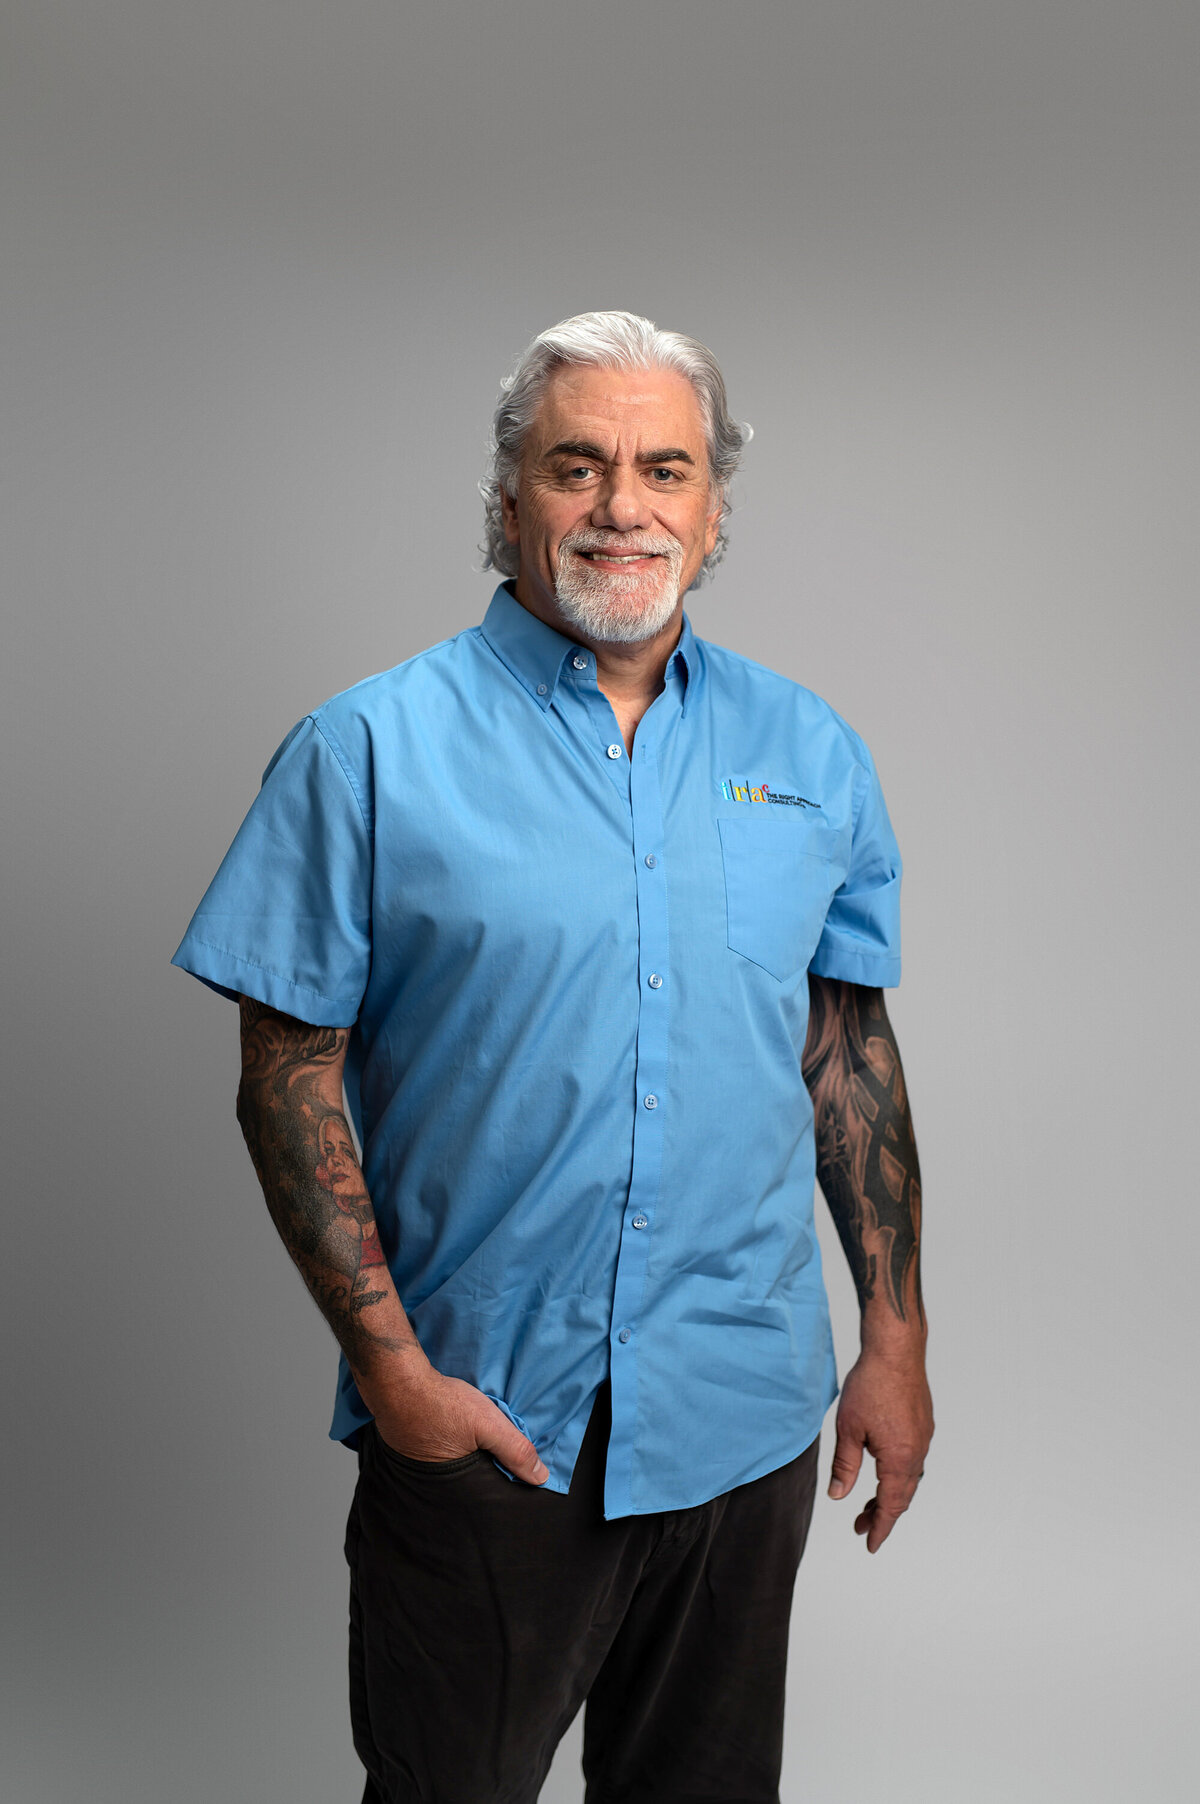 A Hartland, WI mechanic shows off his tattoo sleeves while having his professional headshots updated in our Waukesha portrait studio.